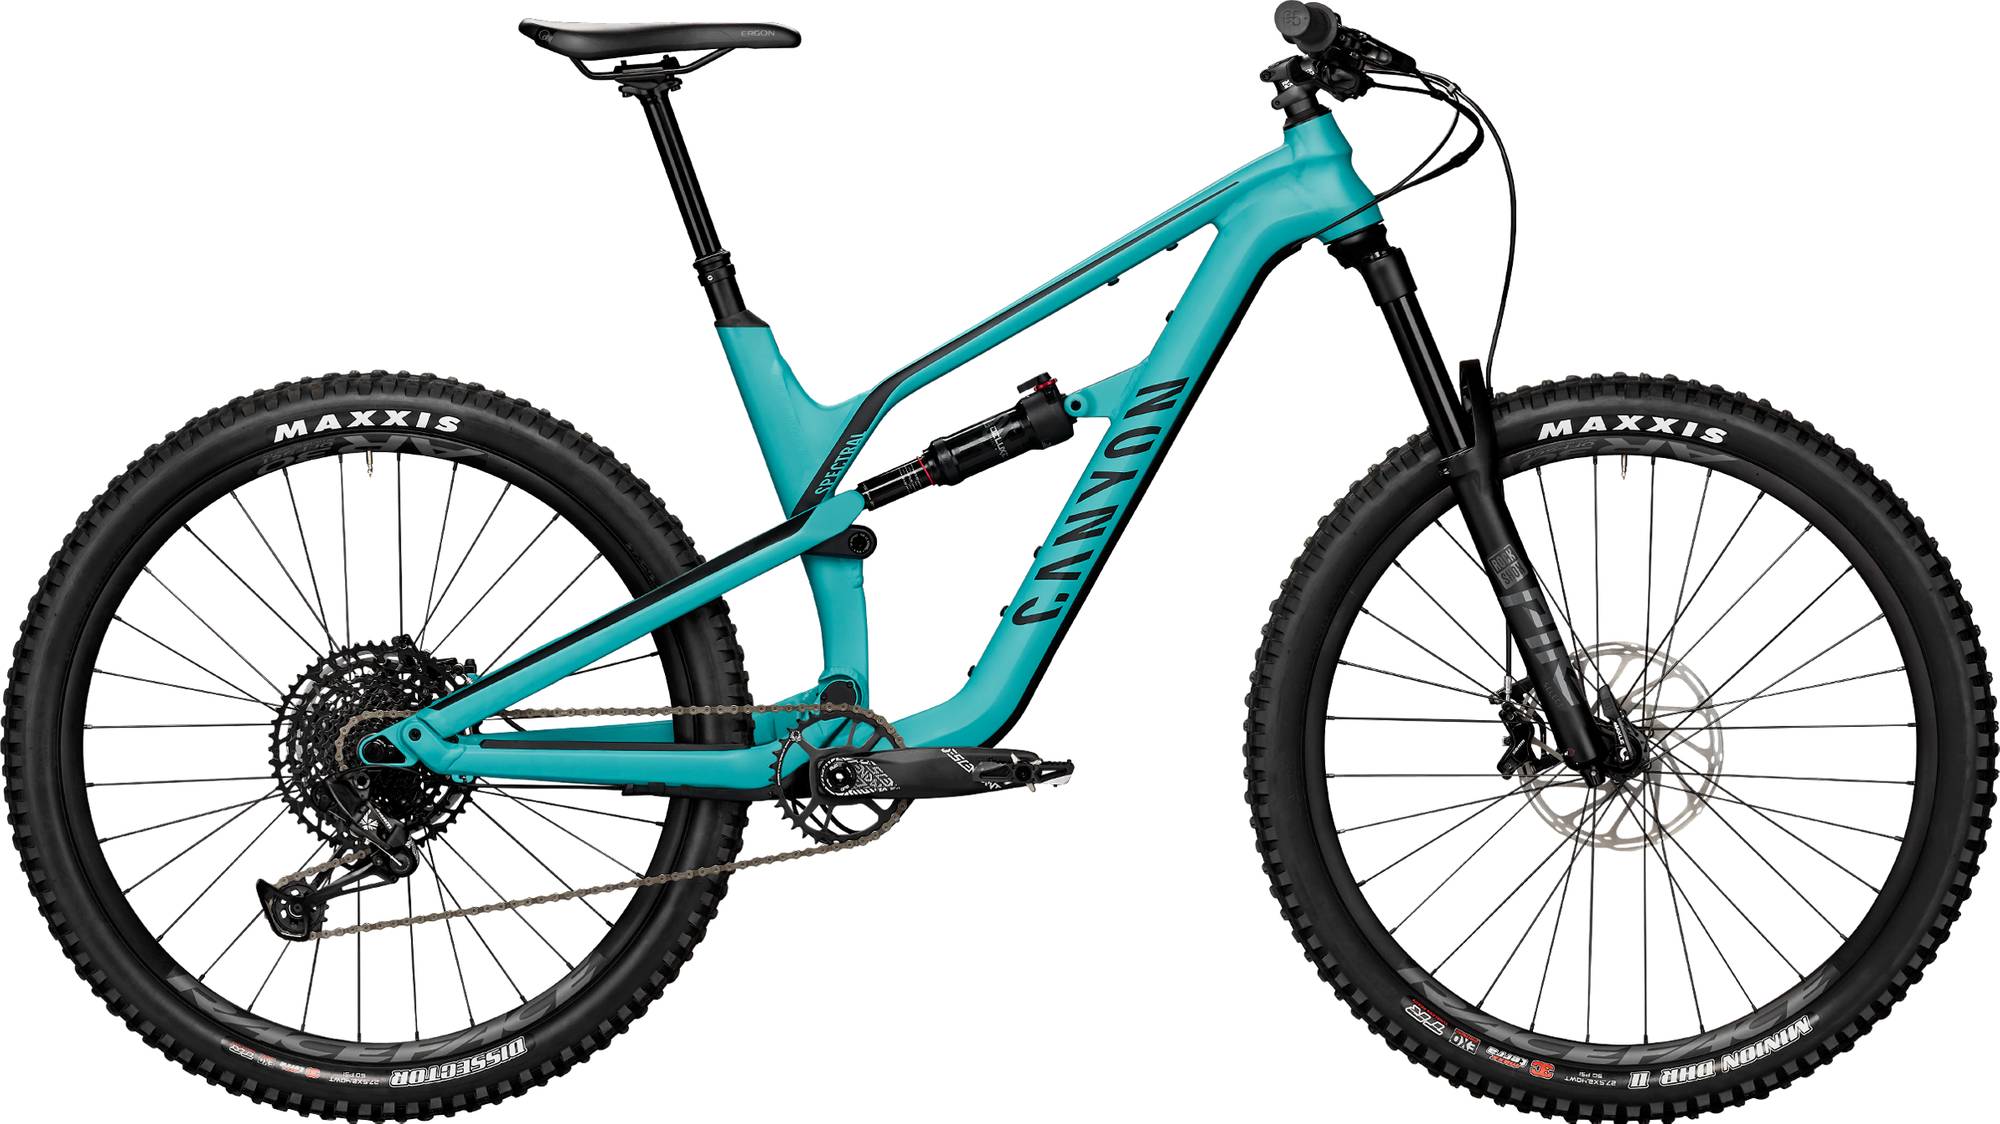 Canyon Spectral 5 2021 | BikeWise